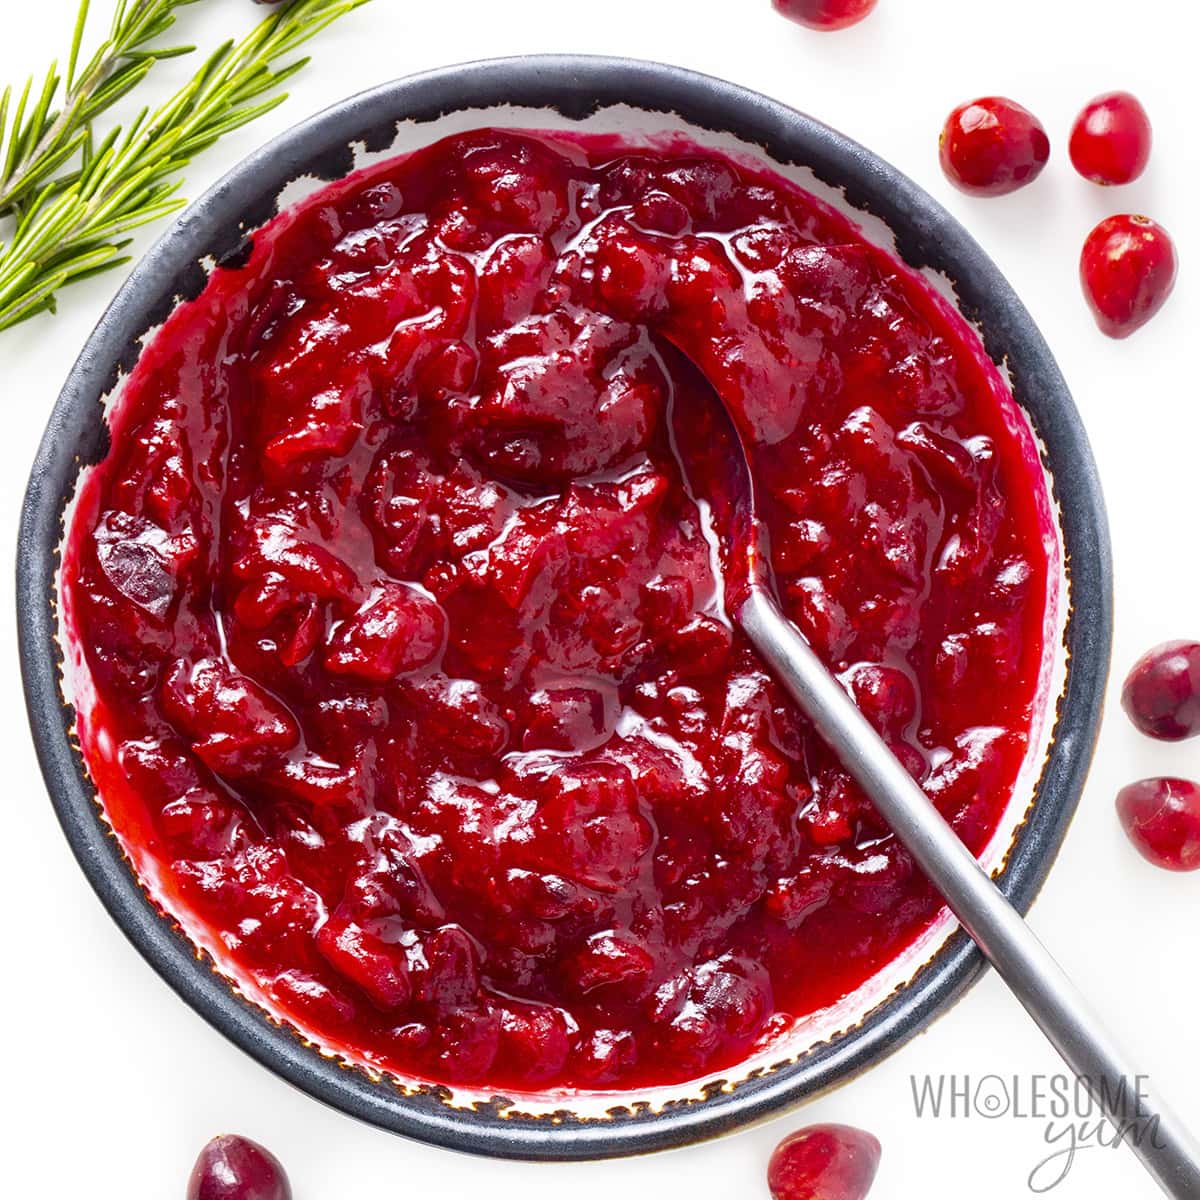 Sugar-free keto cranberry sauce in a bowl.